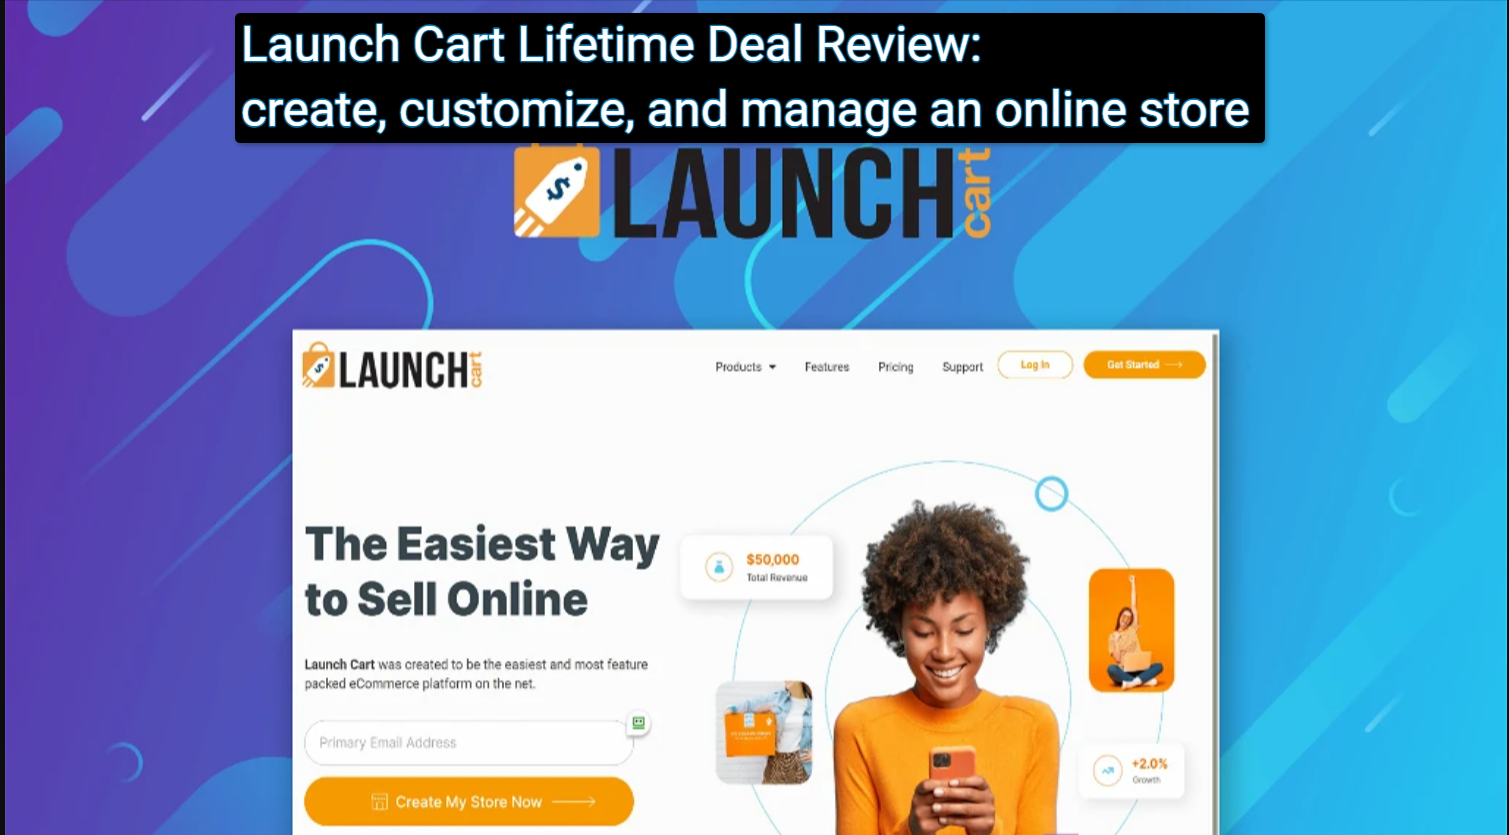 Launch Cart Lifetime Deal Review create customize and manage an online store Launch Cart Lifetime Deal Review: create, customize, and manage an online store